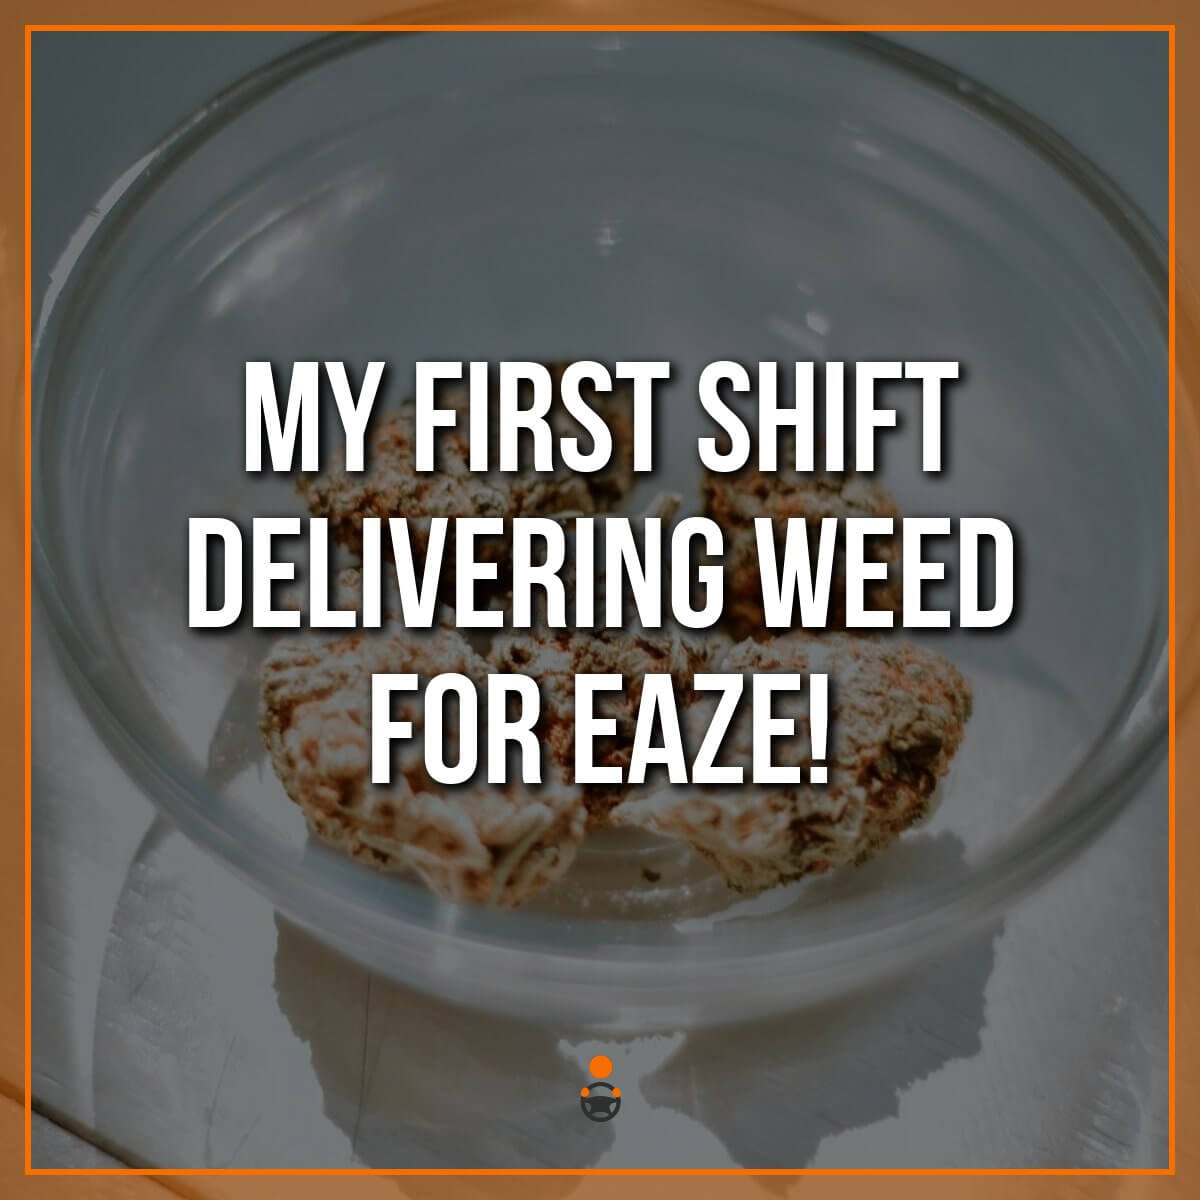 My First Shift Delivering Weed for eaze!